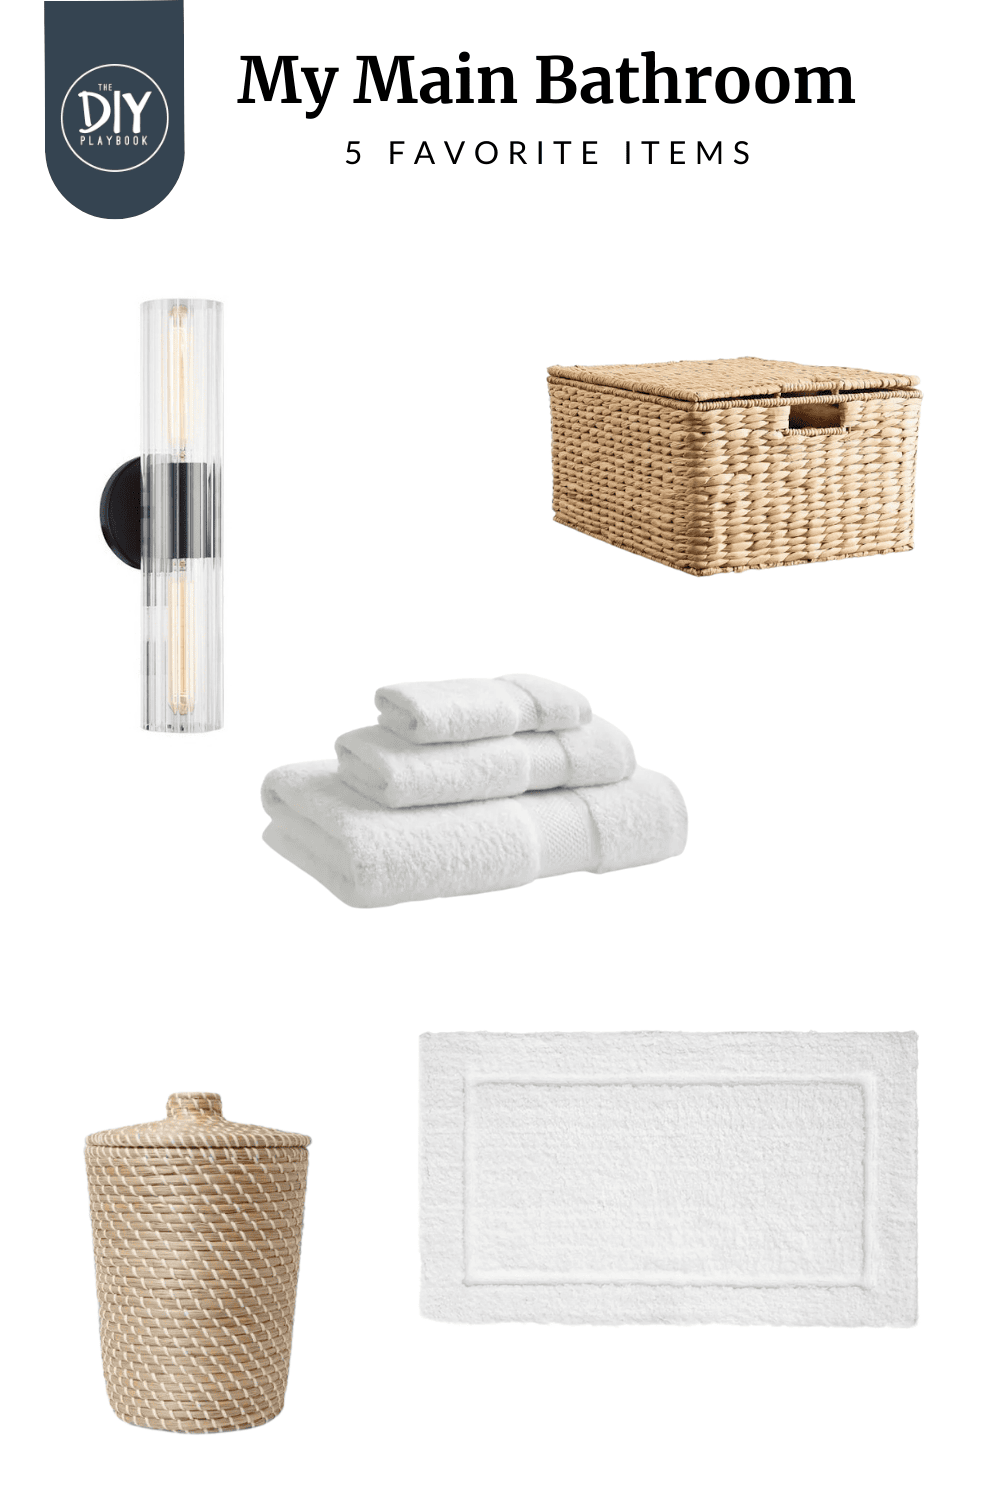 Here are 5 items that elevate my main bathroom space